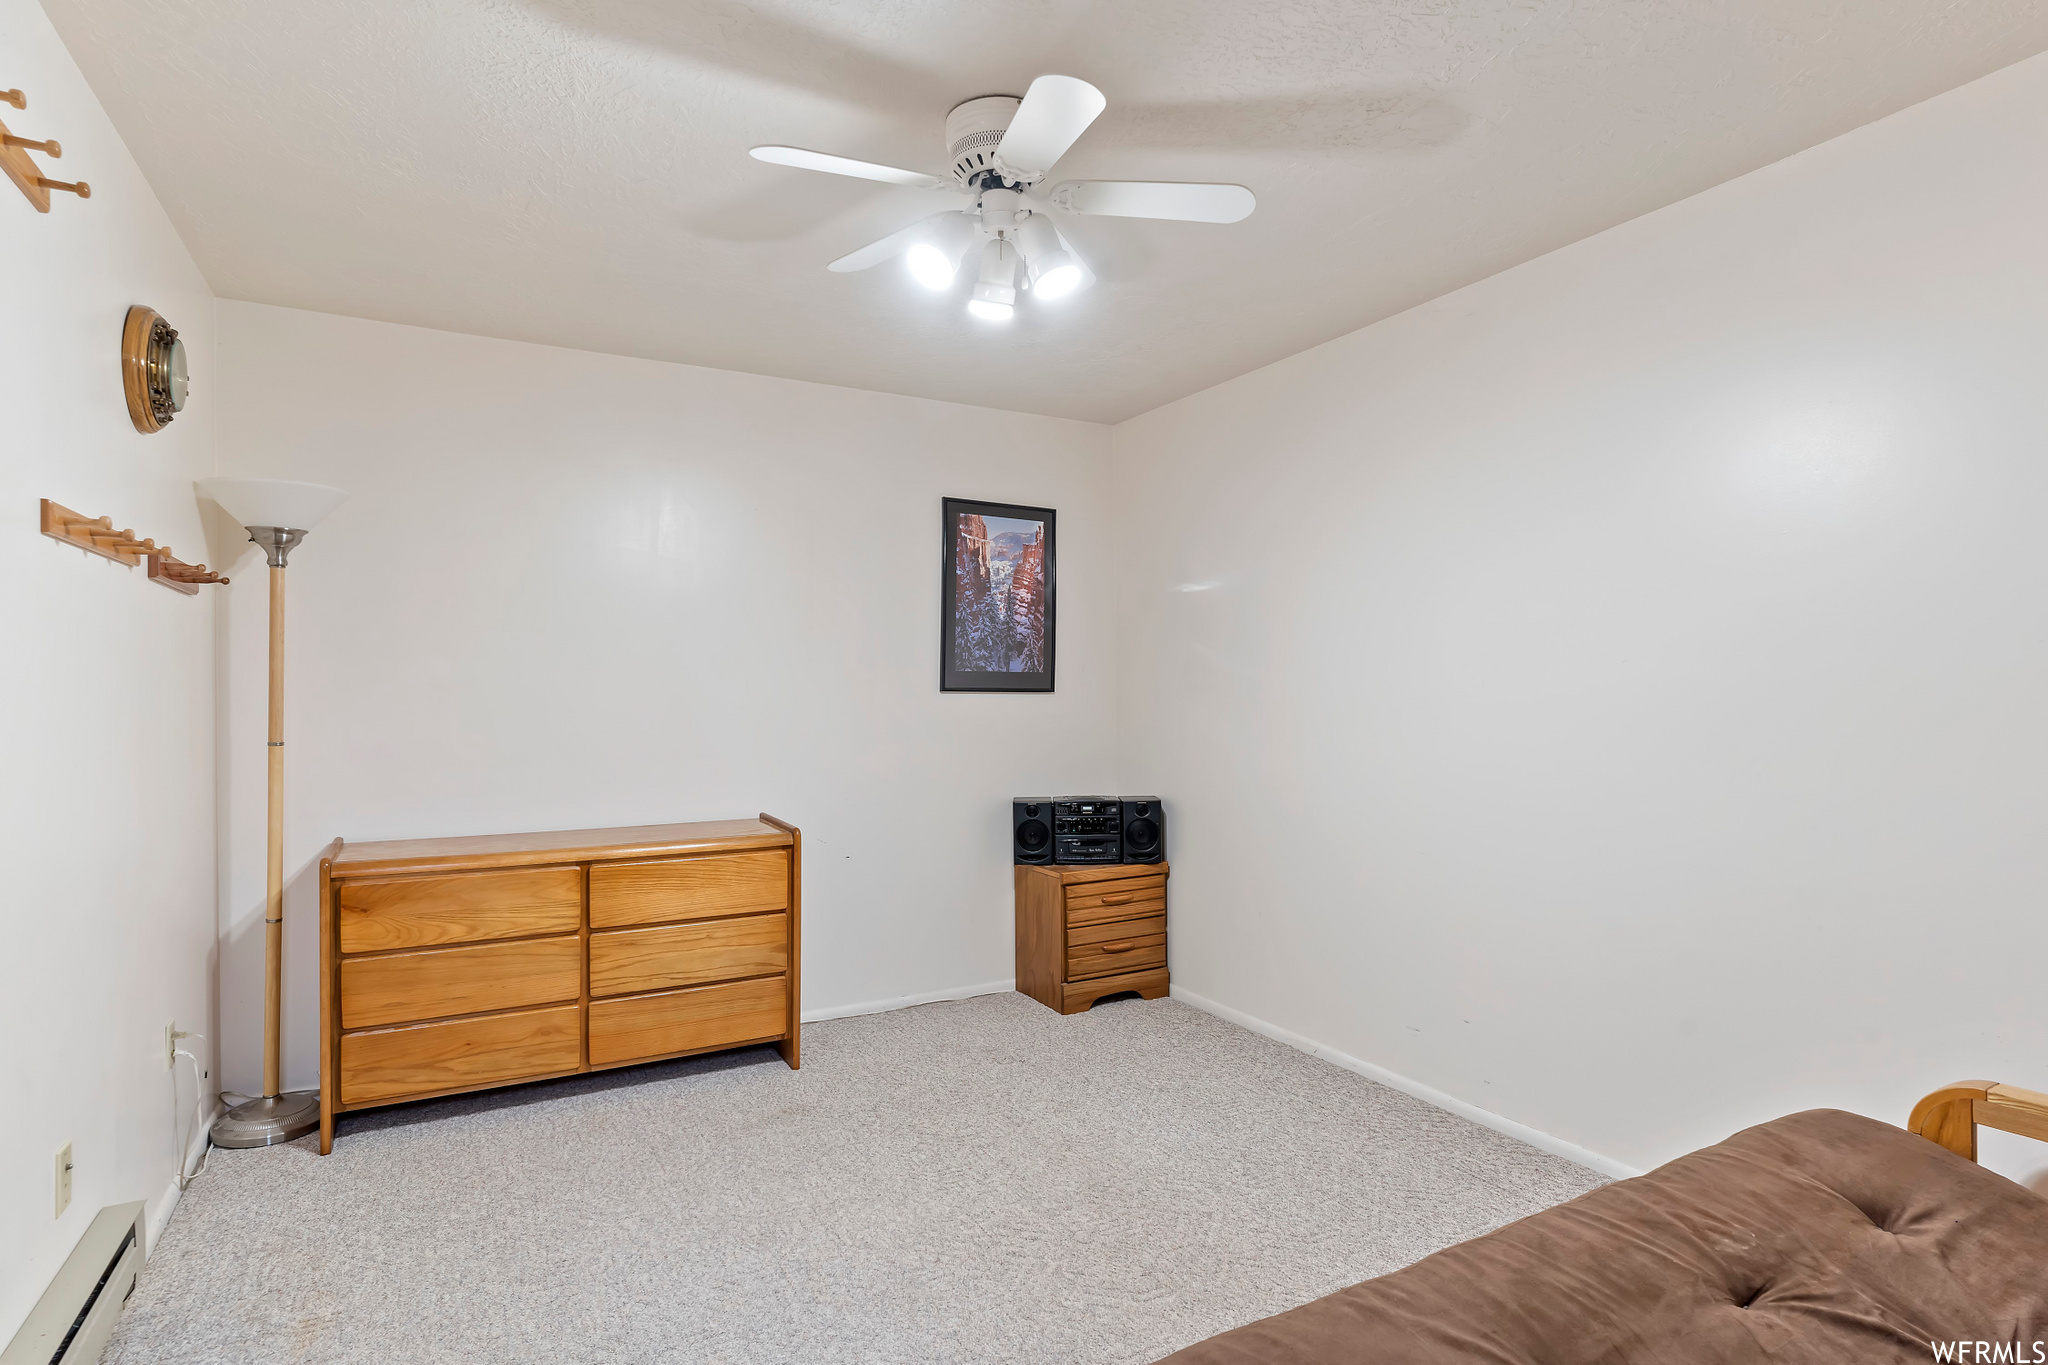 Interior space featuring carpet, a ceiling fan, and baseboard radiator